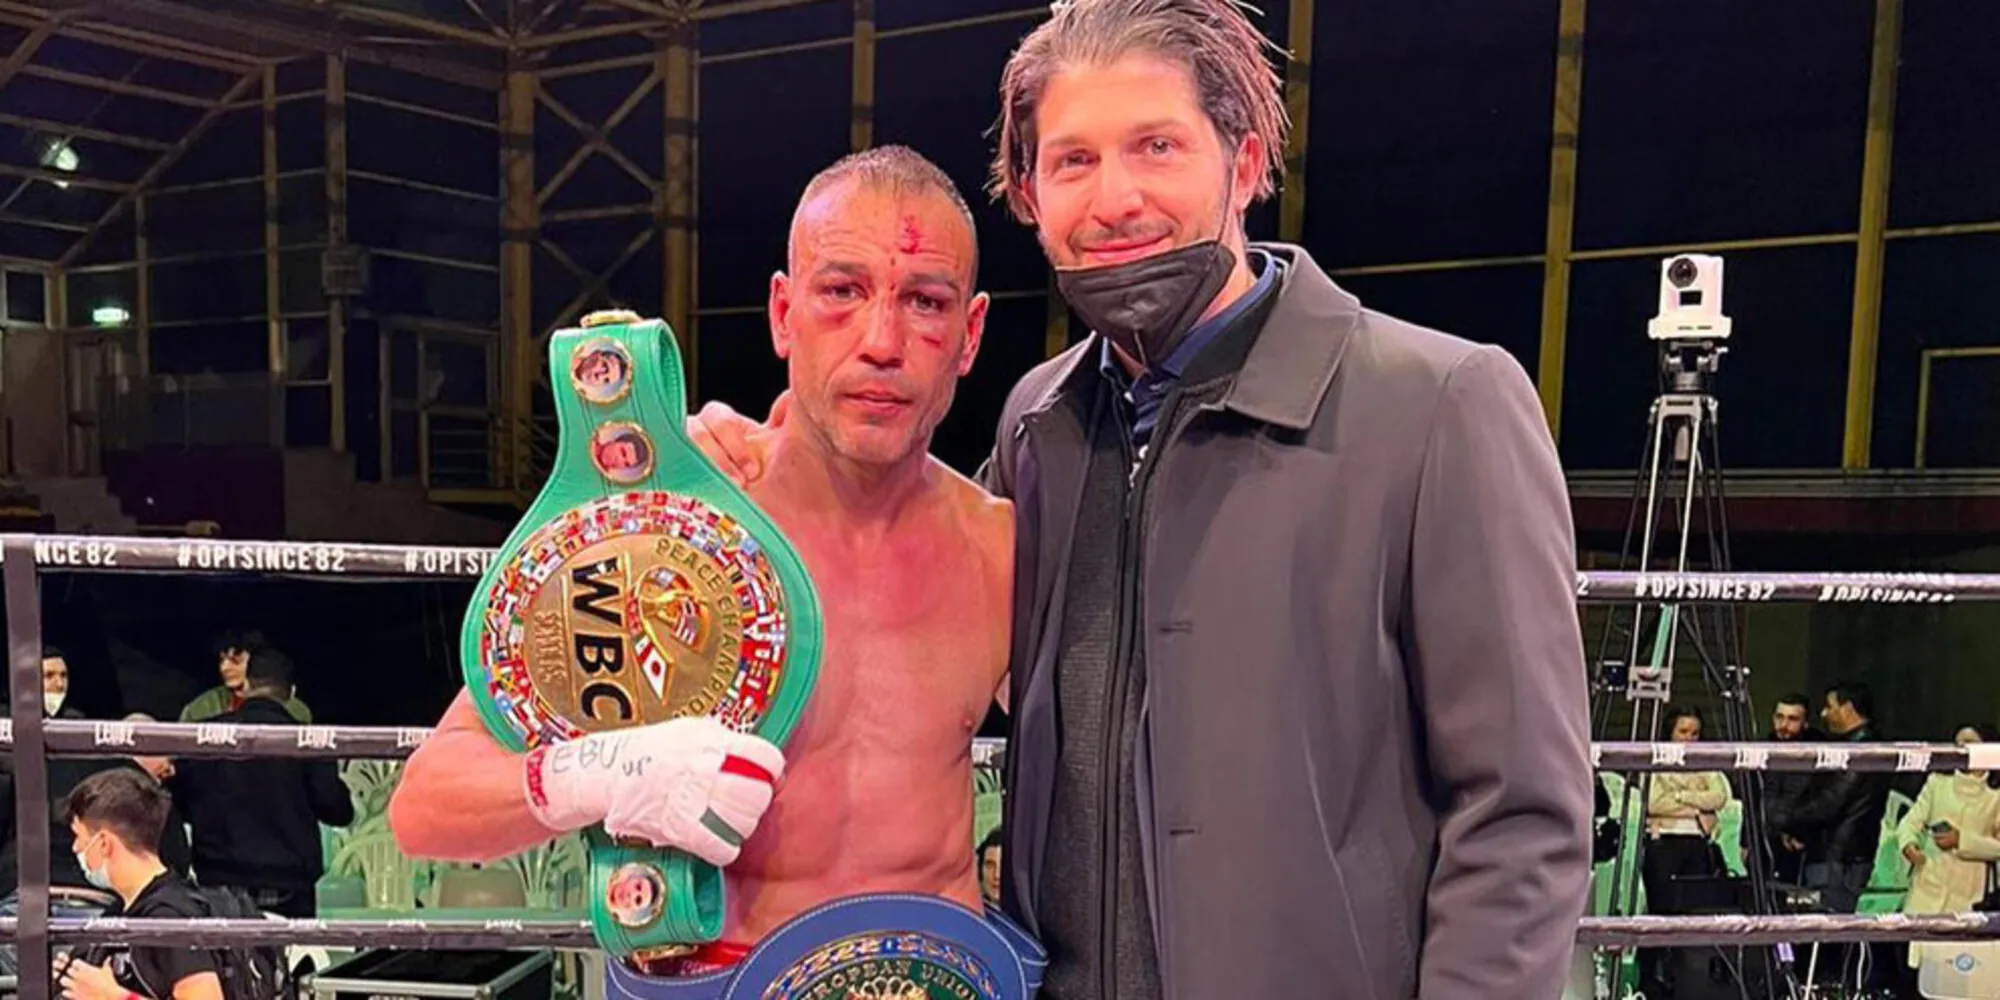 In boxing, Emiliano Marcelli won the European lightweight title